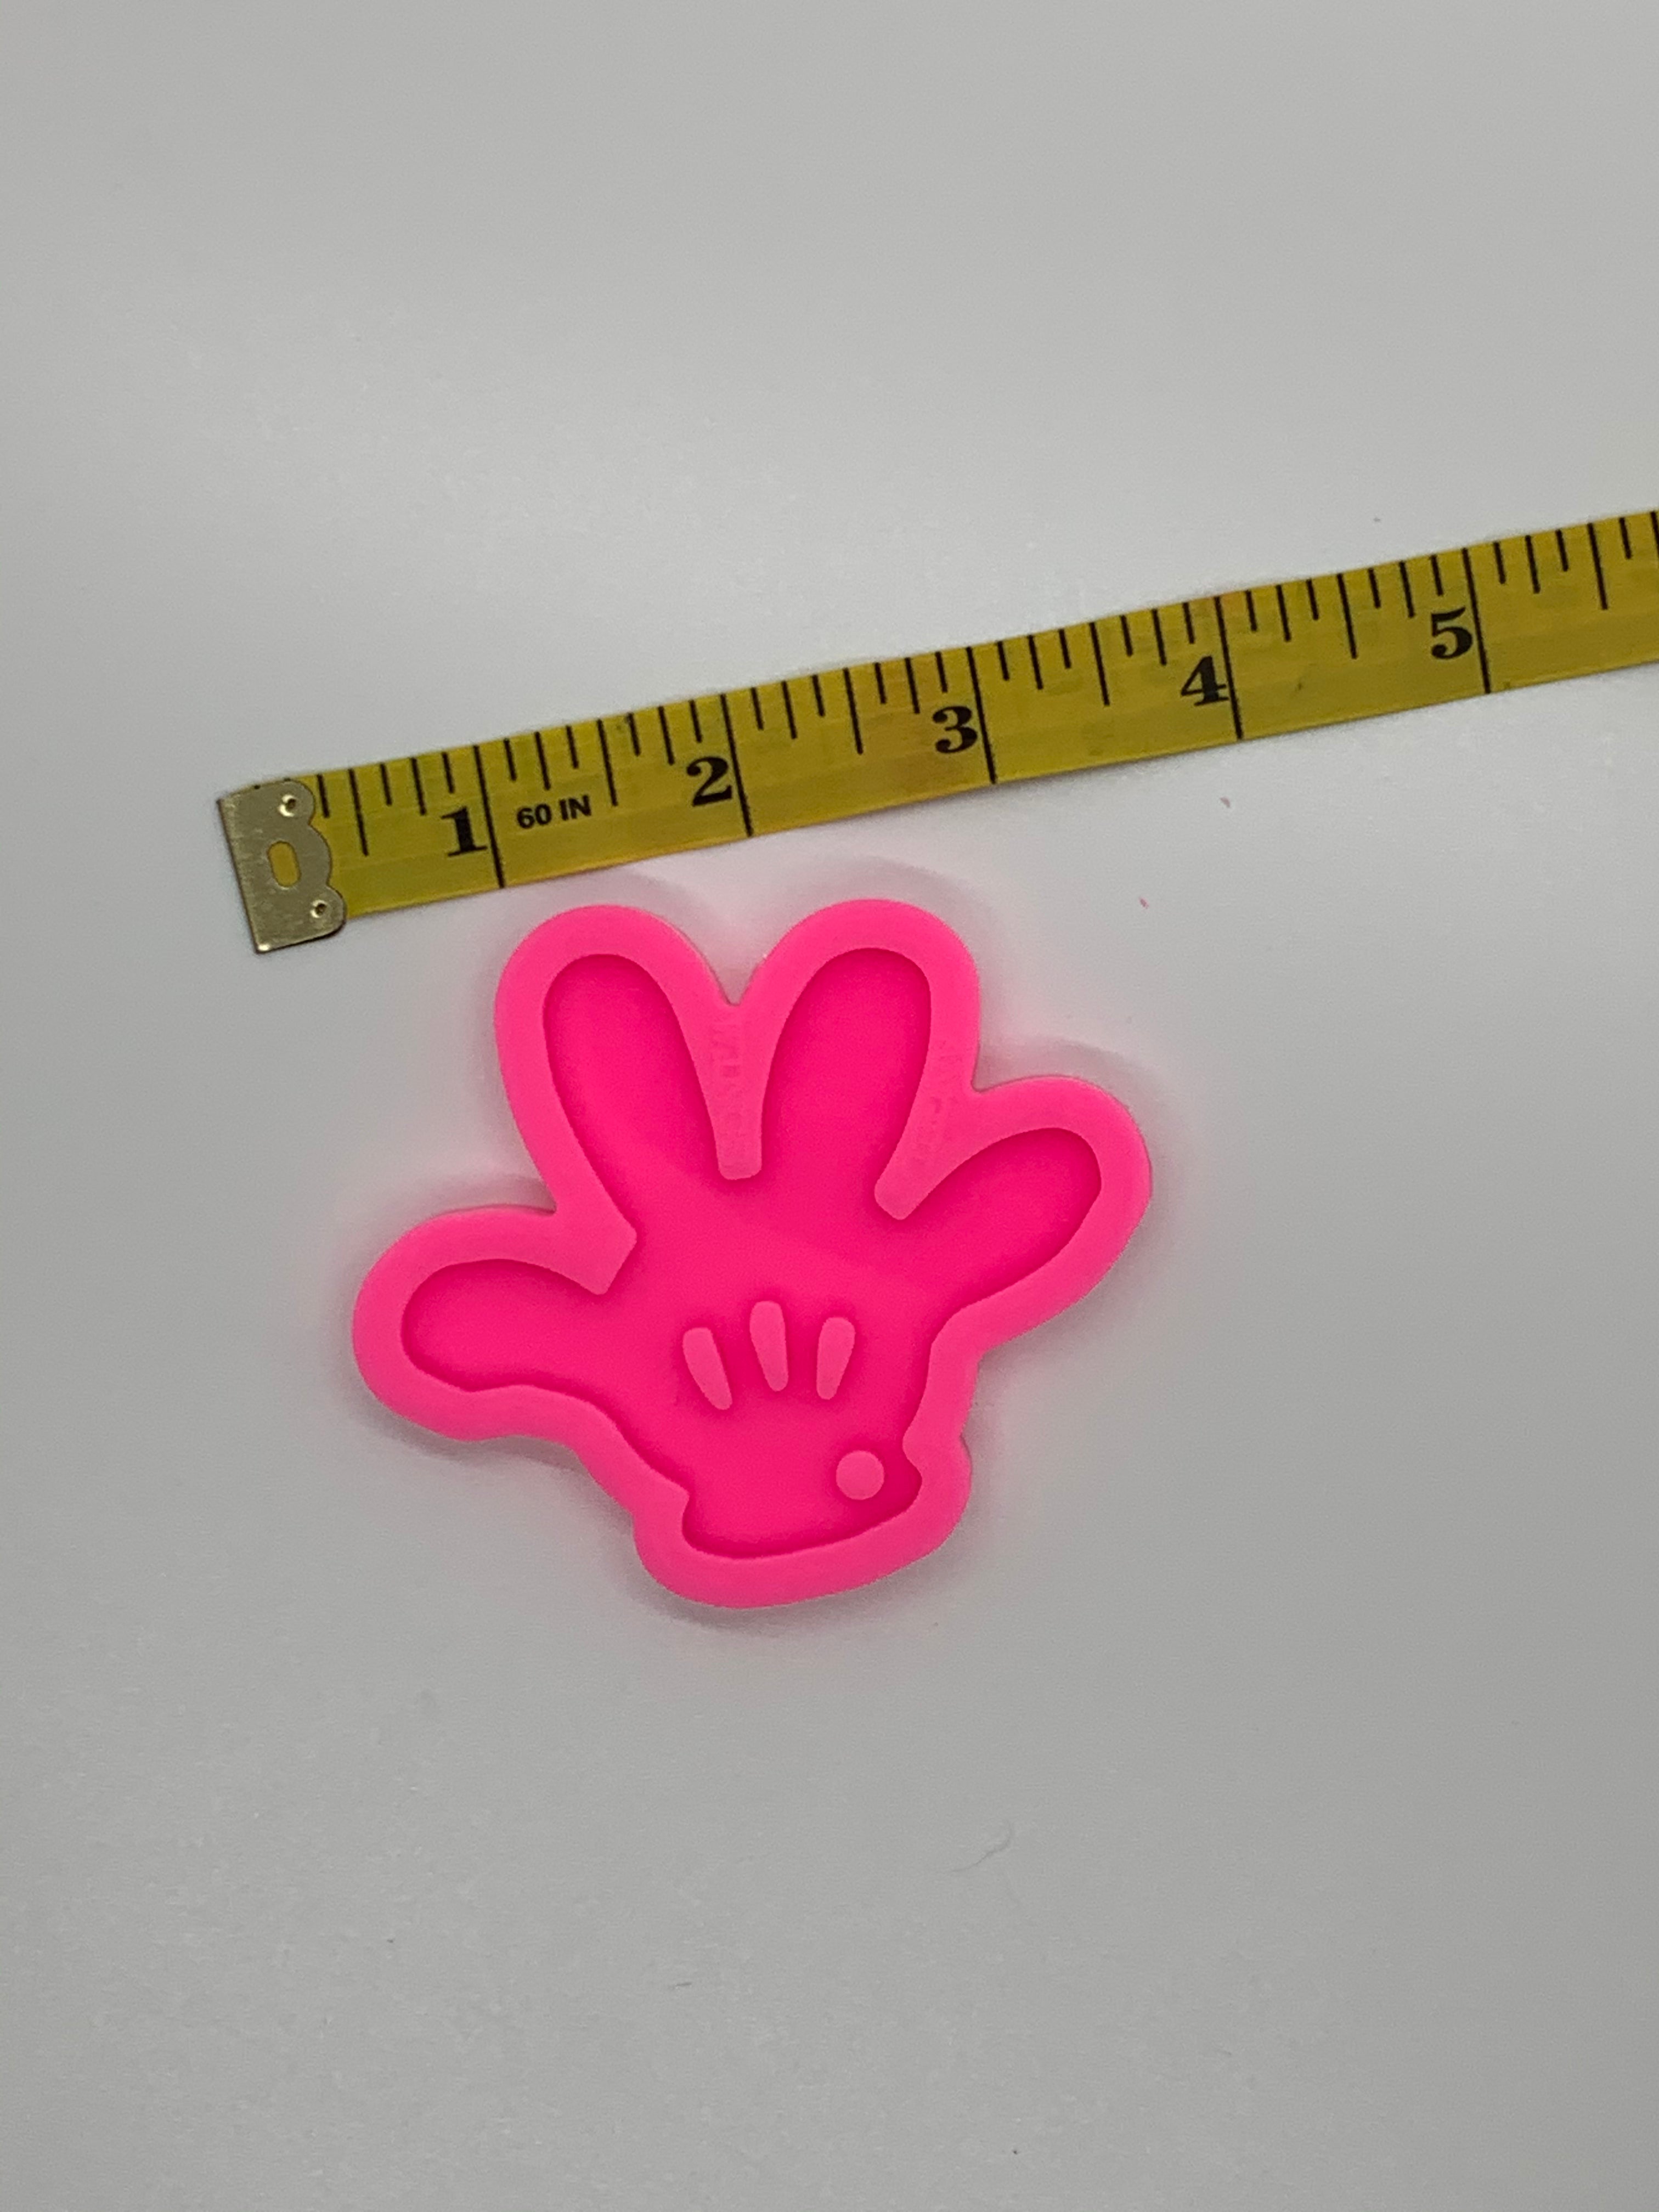 Mickey Hand Shiny Silicone Mold for Epoxy Resin Crafts